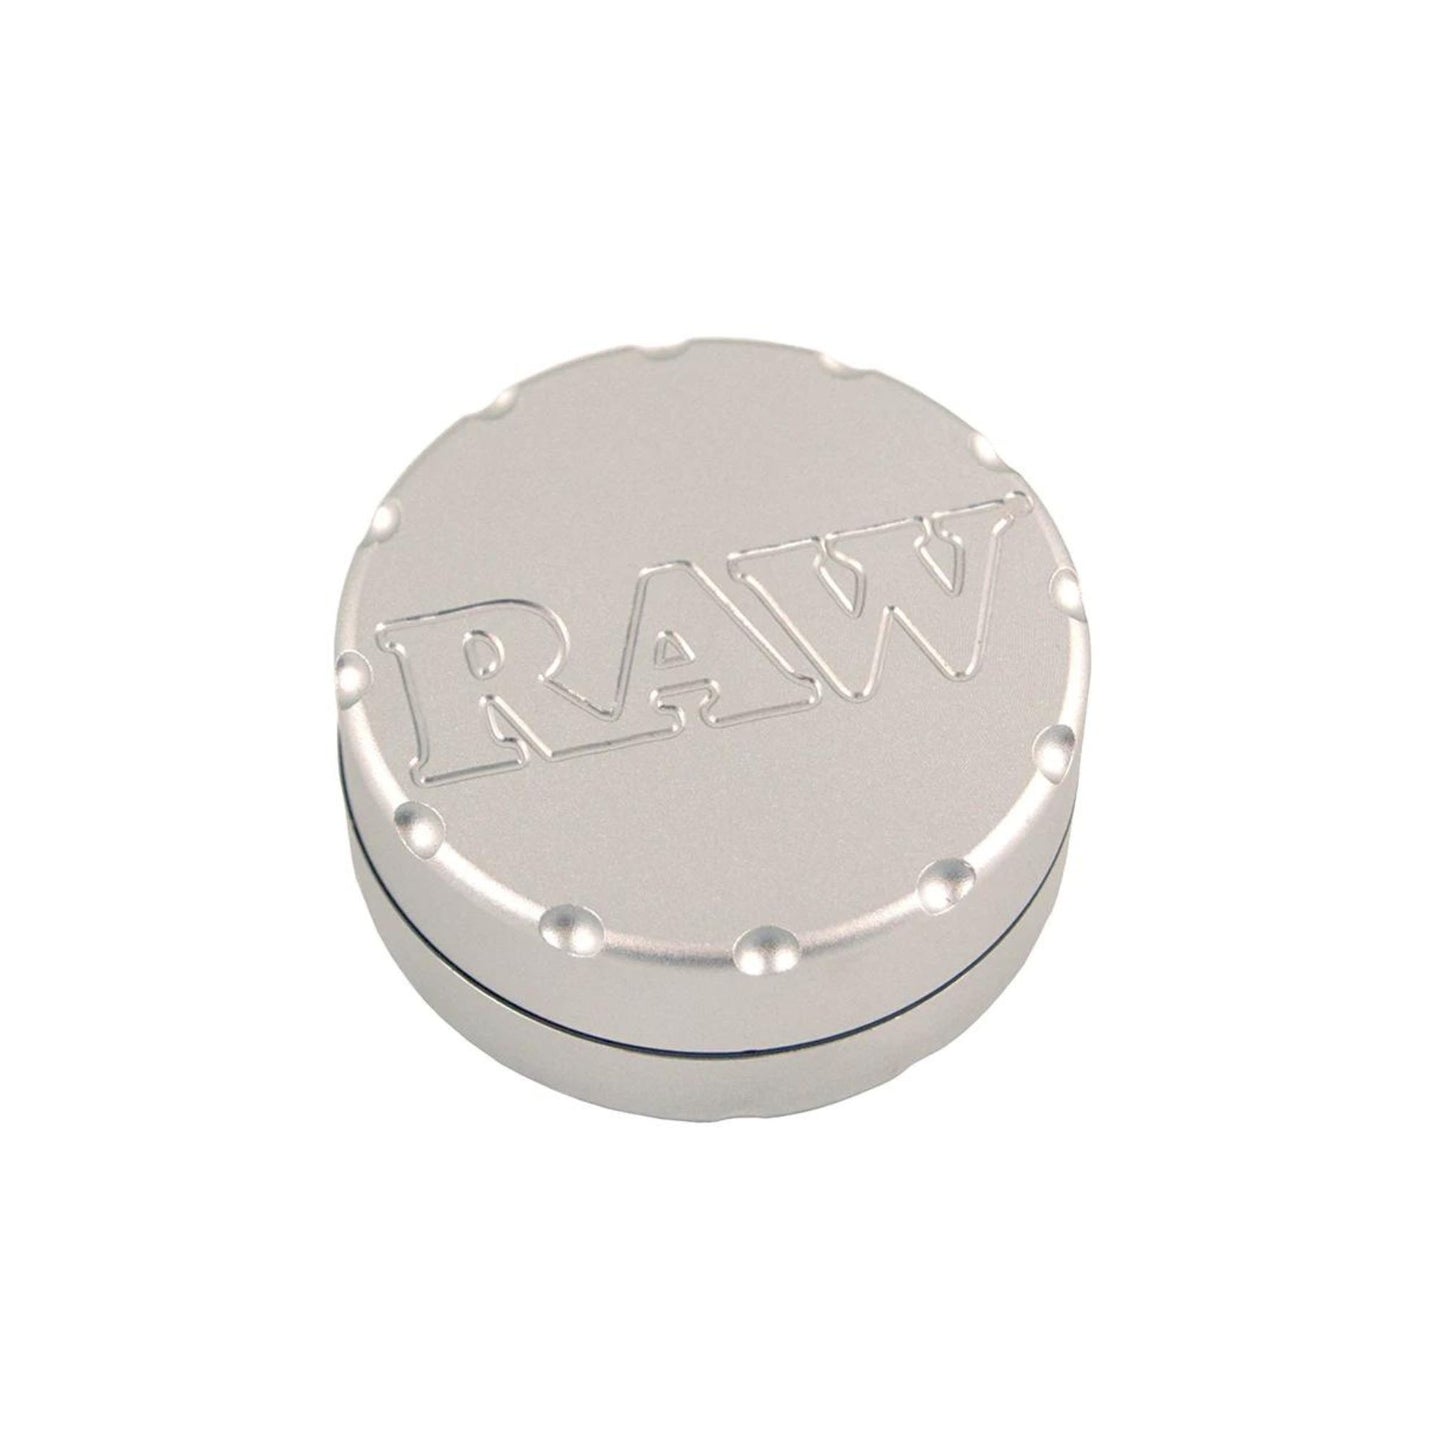 Buy RAW 2 Piece Classic Grinder Online In India at HighJack